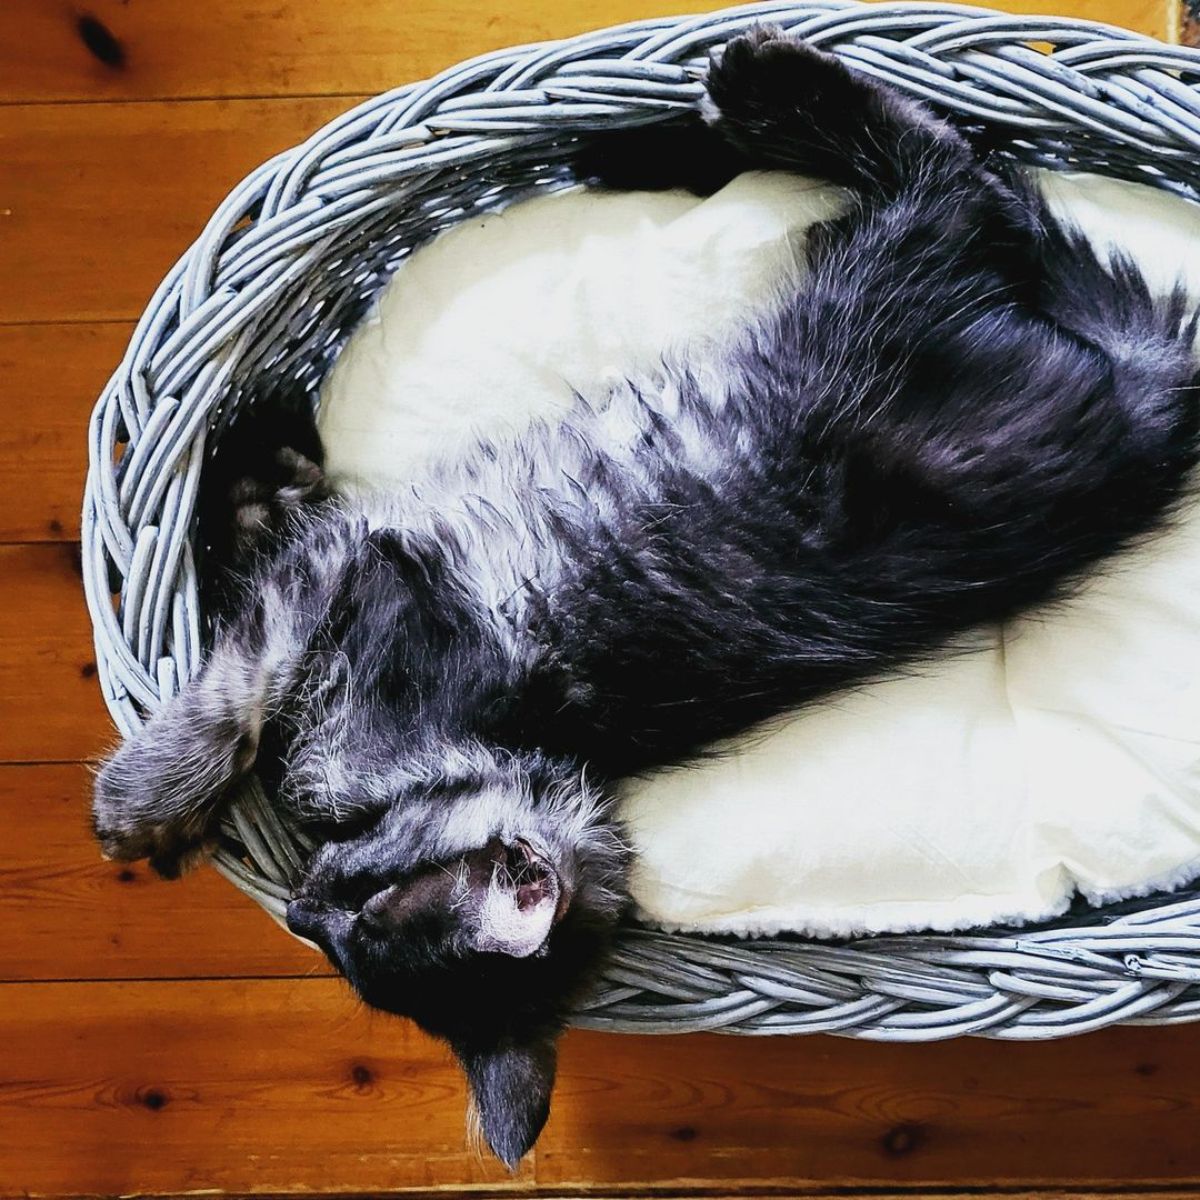 A fluffy black maine coon kitten sleeeping in a cat bed.